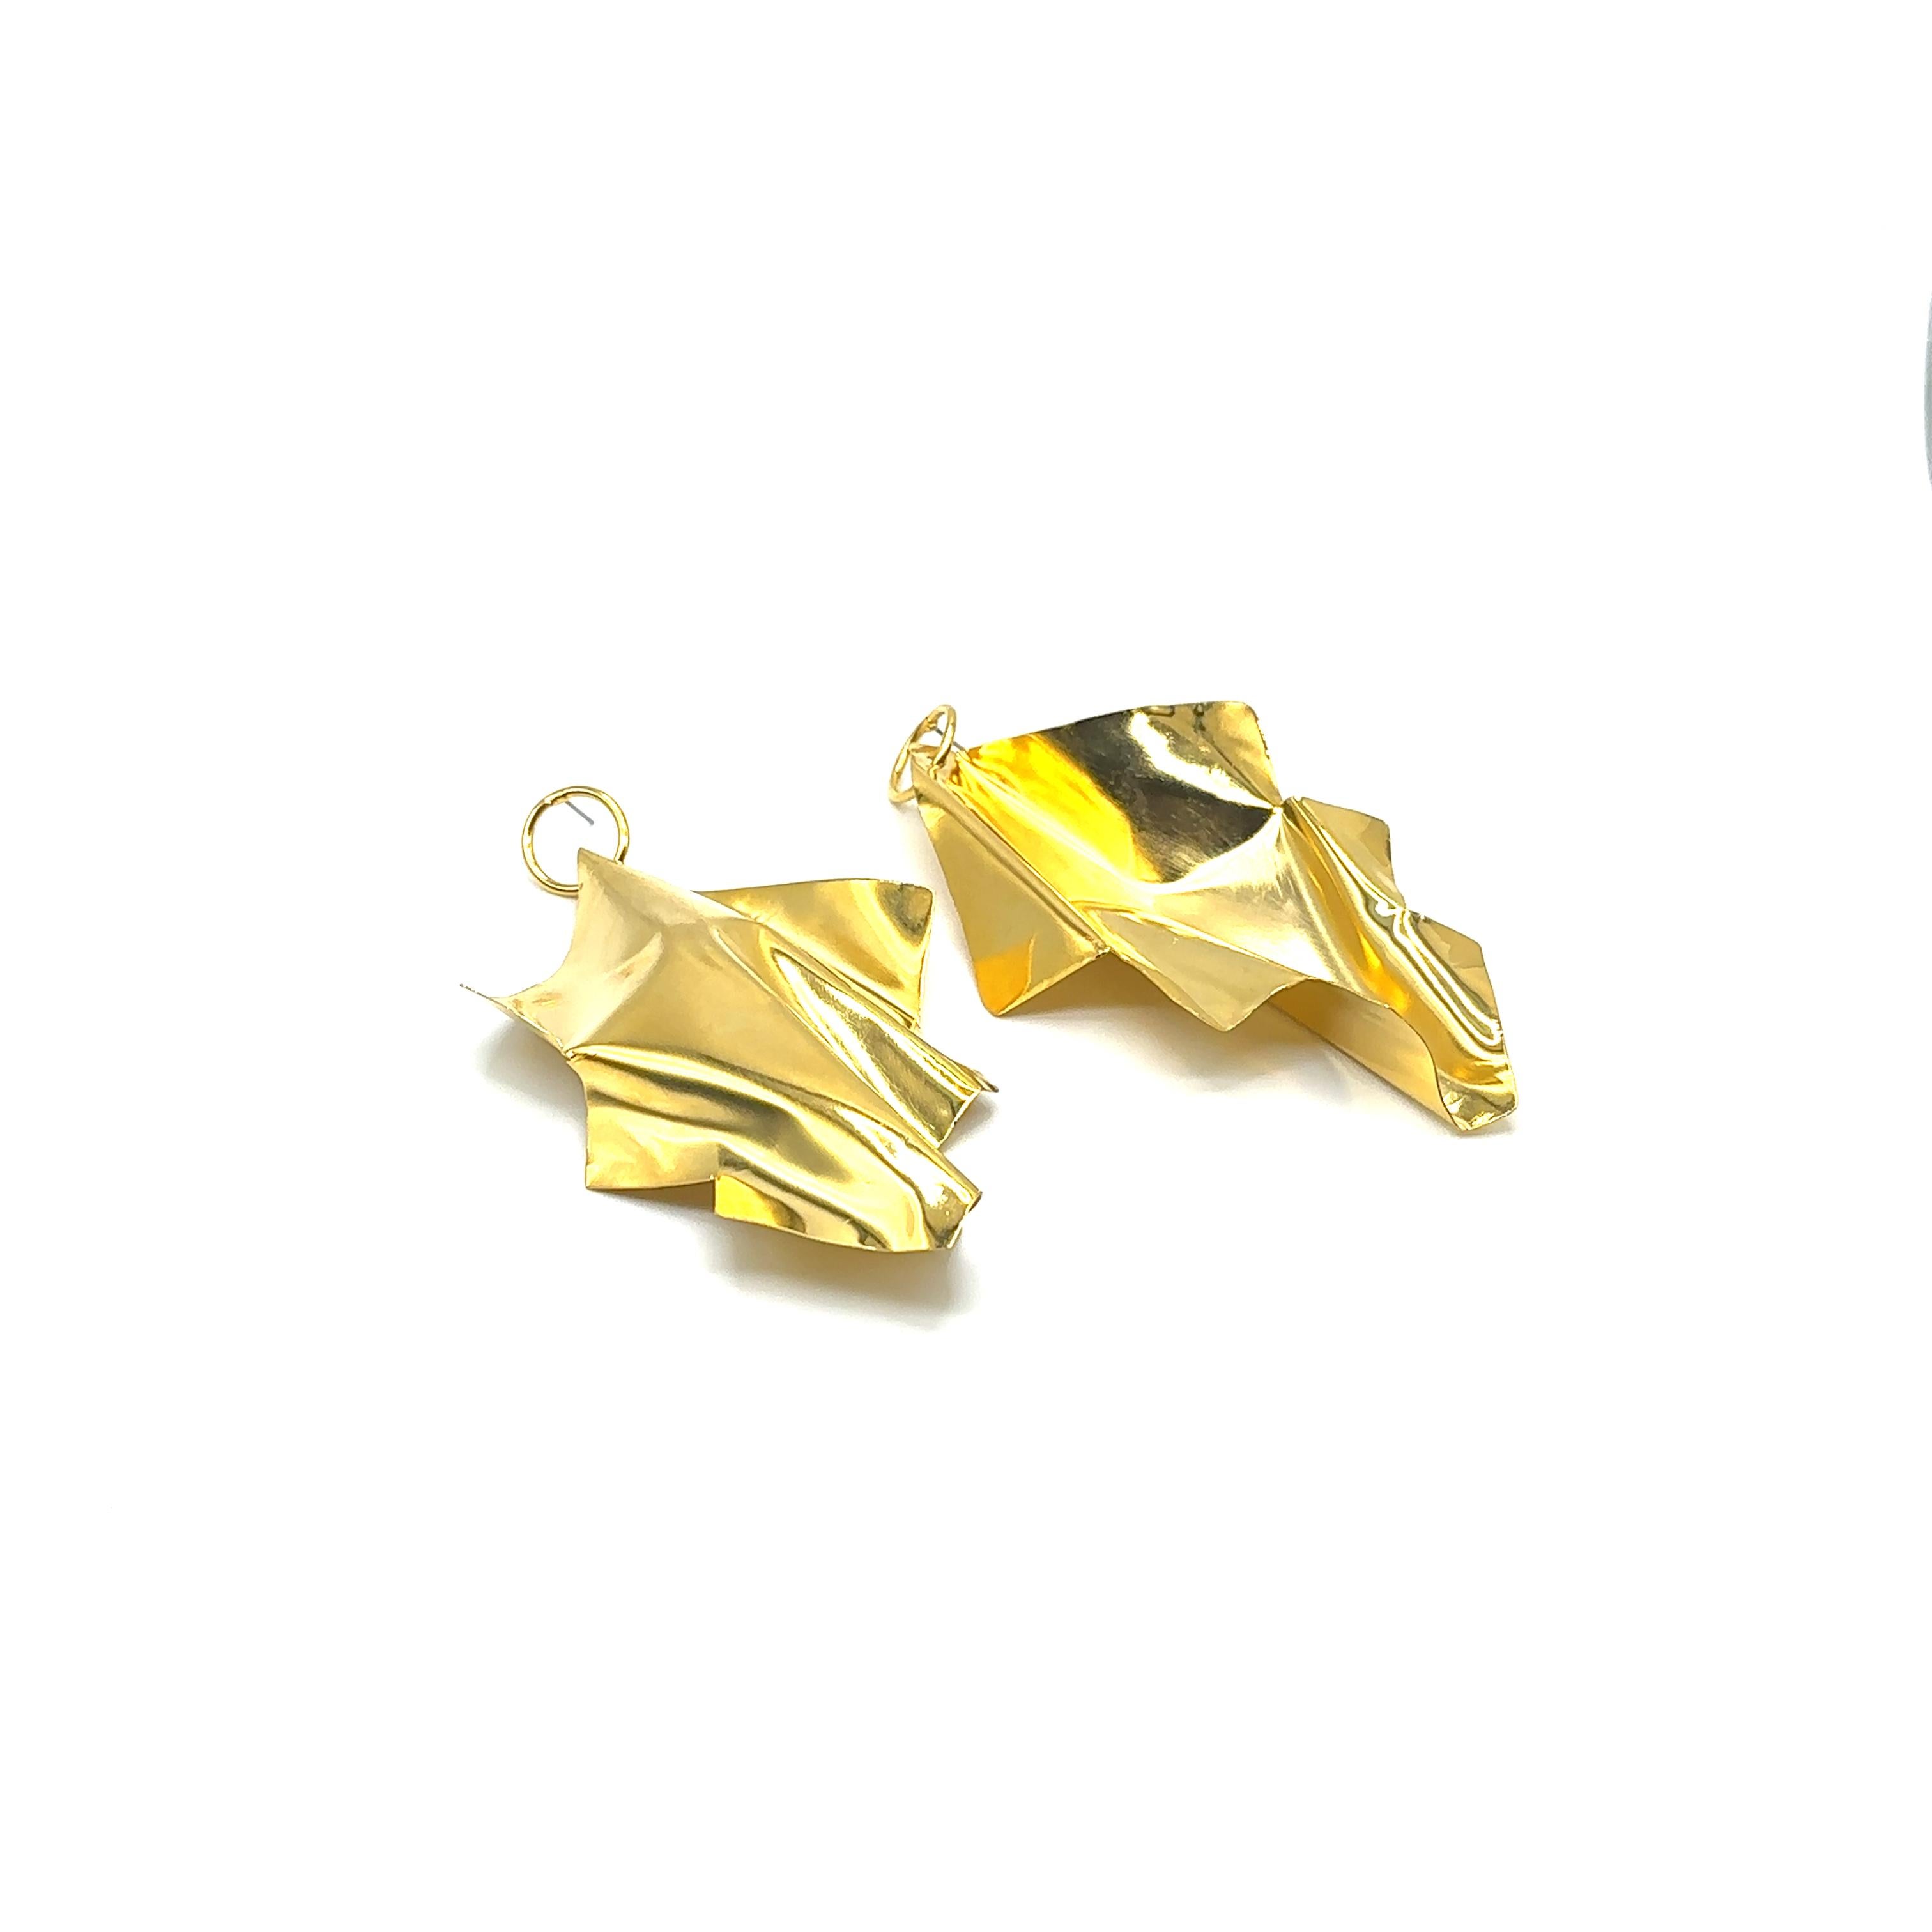 Angela - Dangle Earrings 14k gold plated In New Condition For Sale In Forest Hills, NY